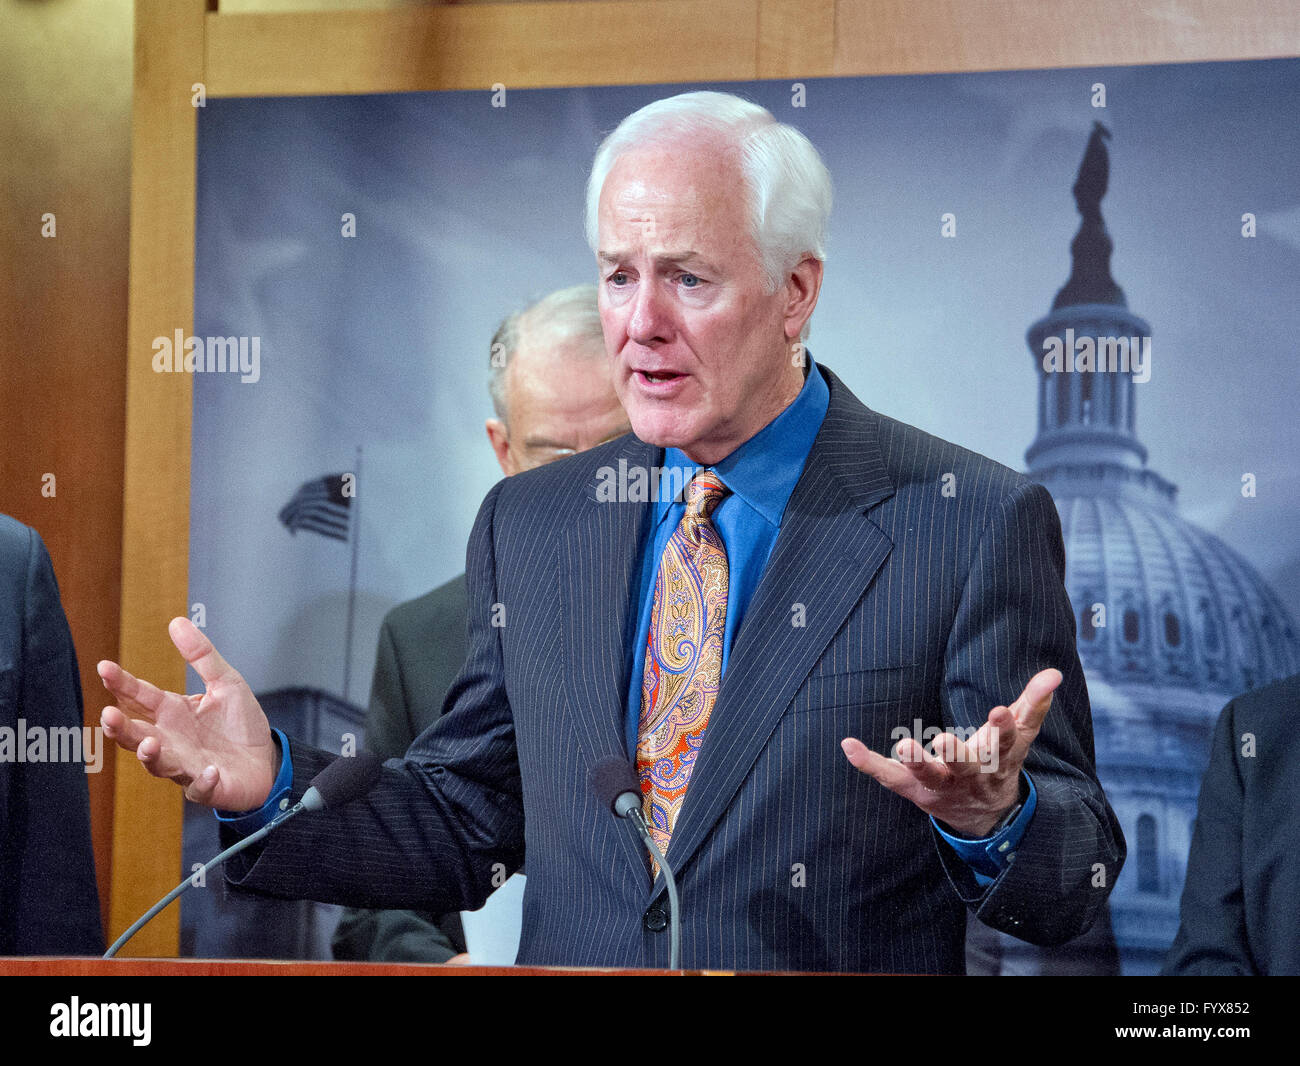 United States Senator John Cornyn (Republican of Texas) makes remarks at a press conference calling on the US Senate Republican leadership to bring to the floor the bipartisan Sentencing Reform and Corrections Act, a bill to reduce some mandatory minimum sentences and apply those changes retroactively to inmates currently serving unfair sentences. Credit: Ron Sachs/CNP - NO WIRE SERVICE - Stock Photo